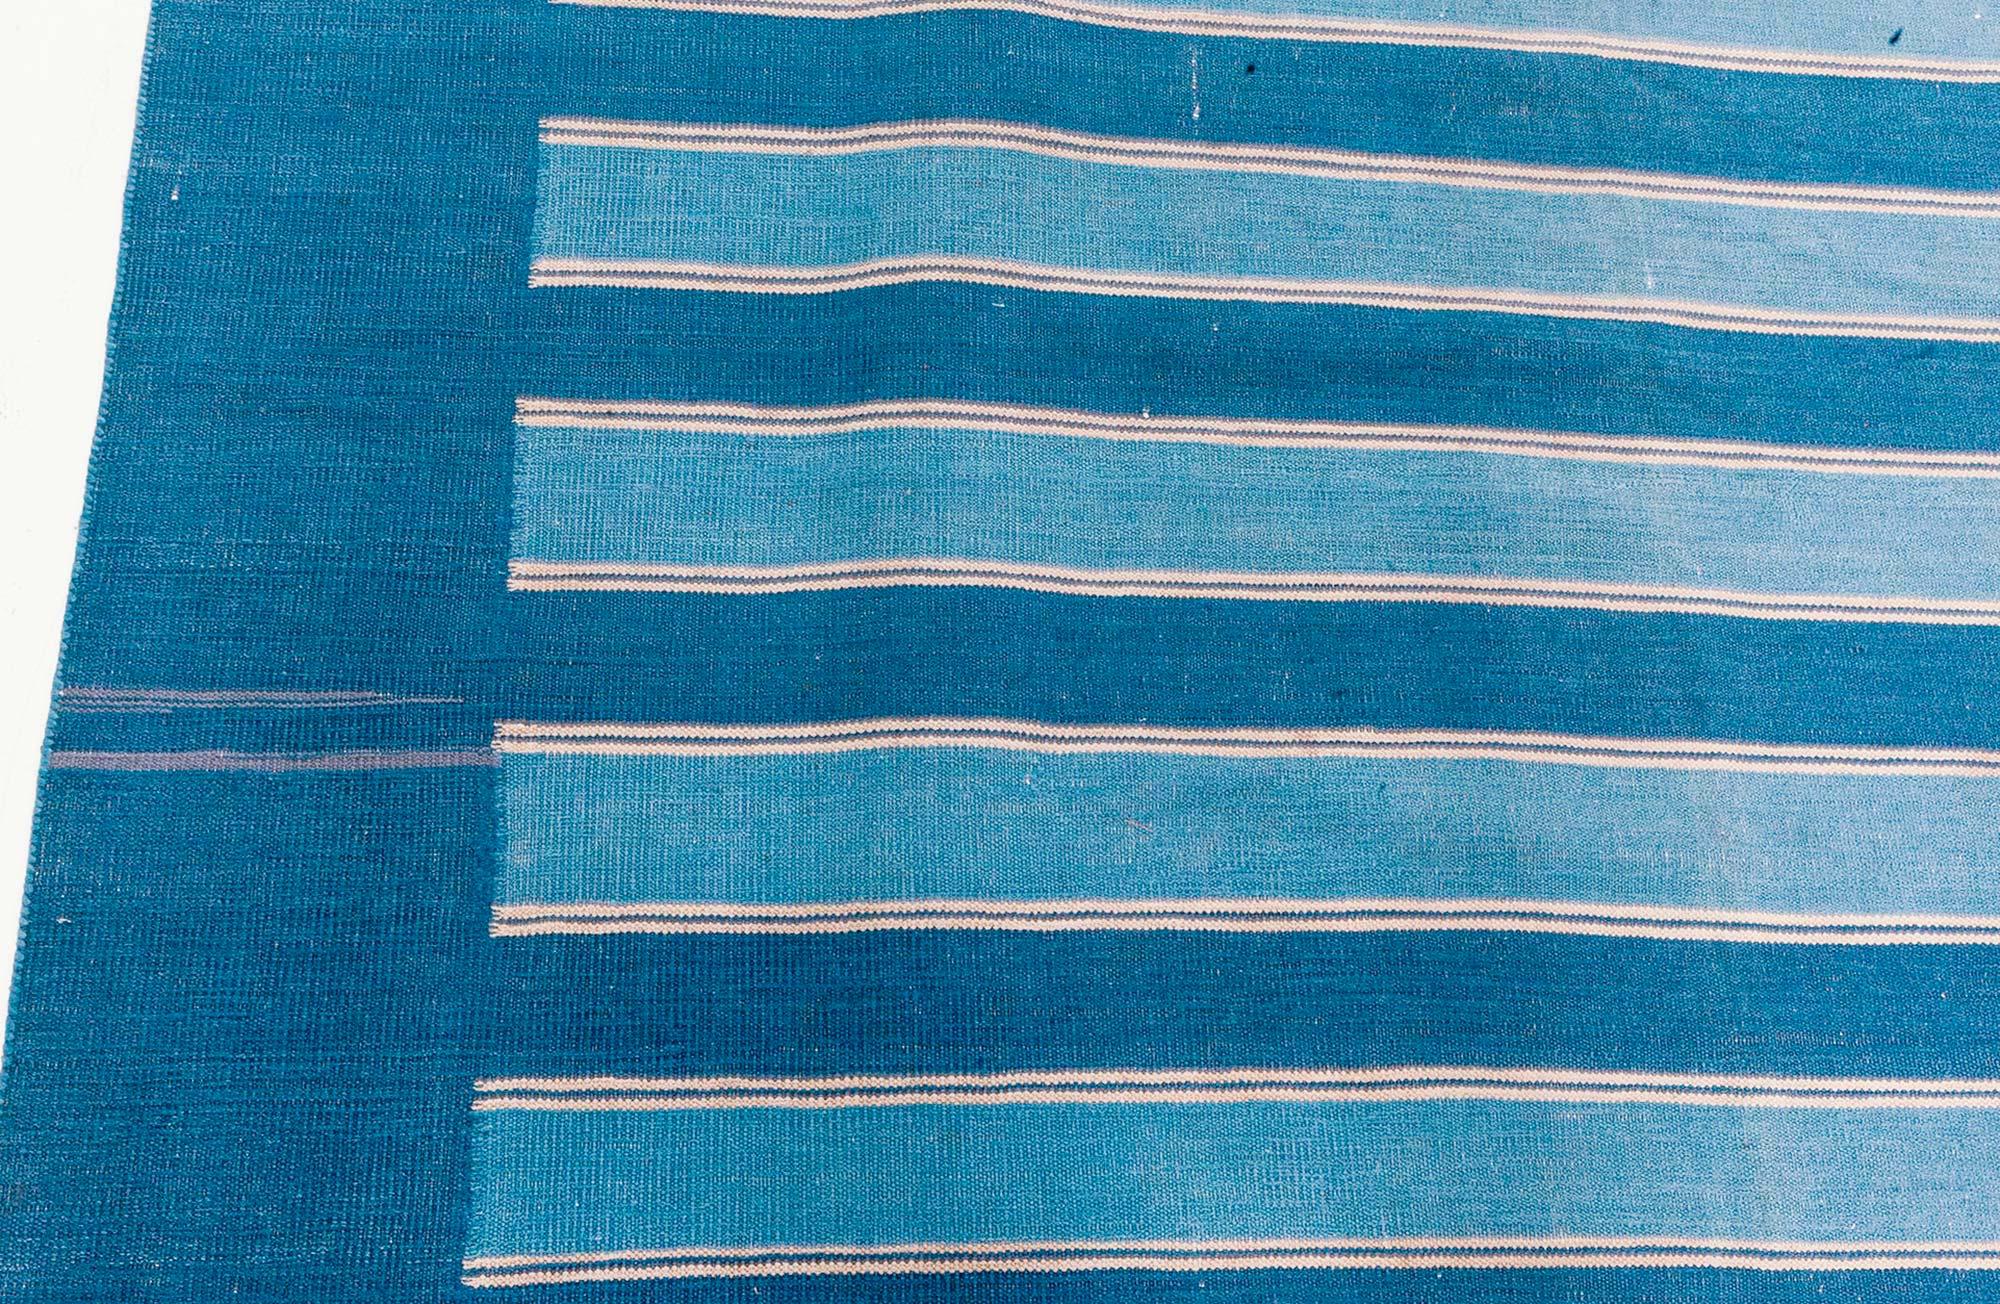 Hand-Woven Vintage Indian Dhurrie Striped Blue Beige Rug For Sale